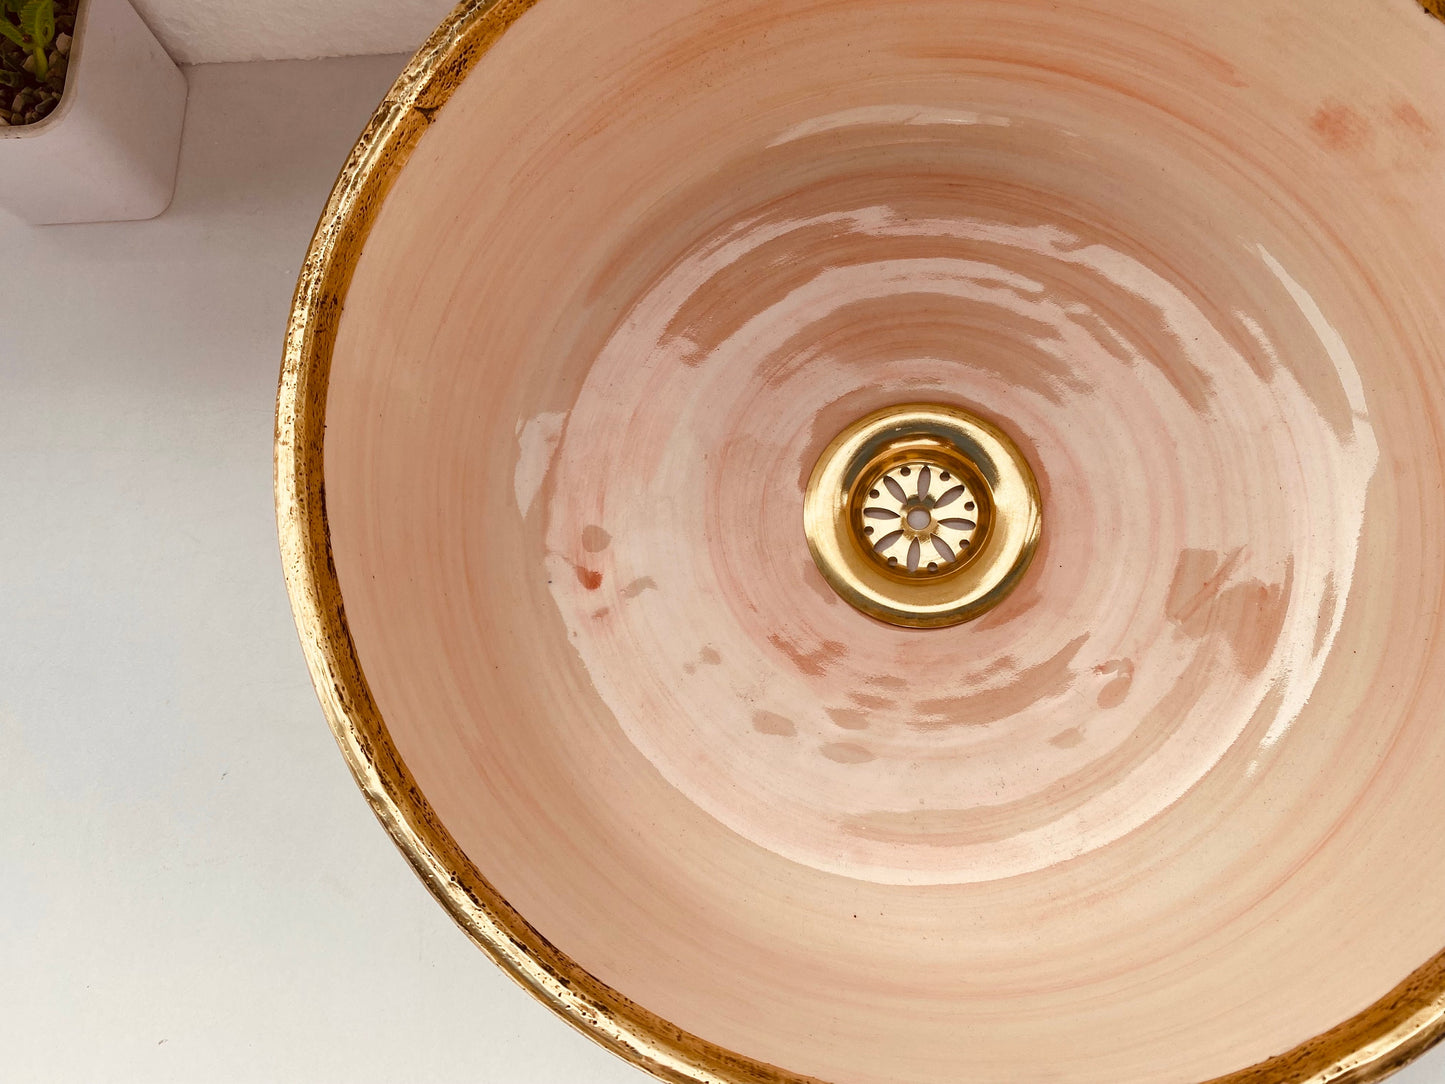 Pink Bathroom veseel sink Brushed Solid Brass Rimmed  -  washBasin with Mid-Century Modern  - Artisanal Farmhouse basin free gift with